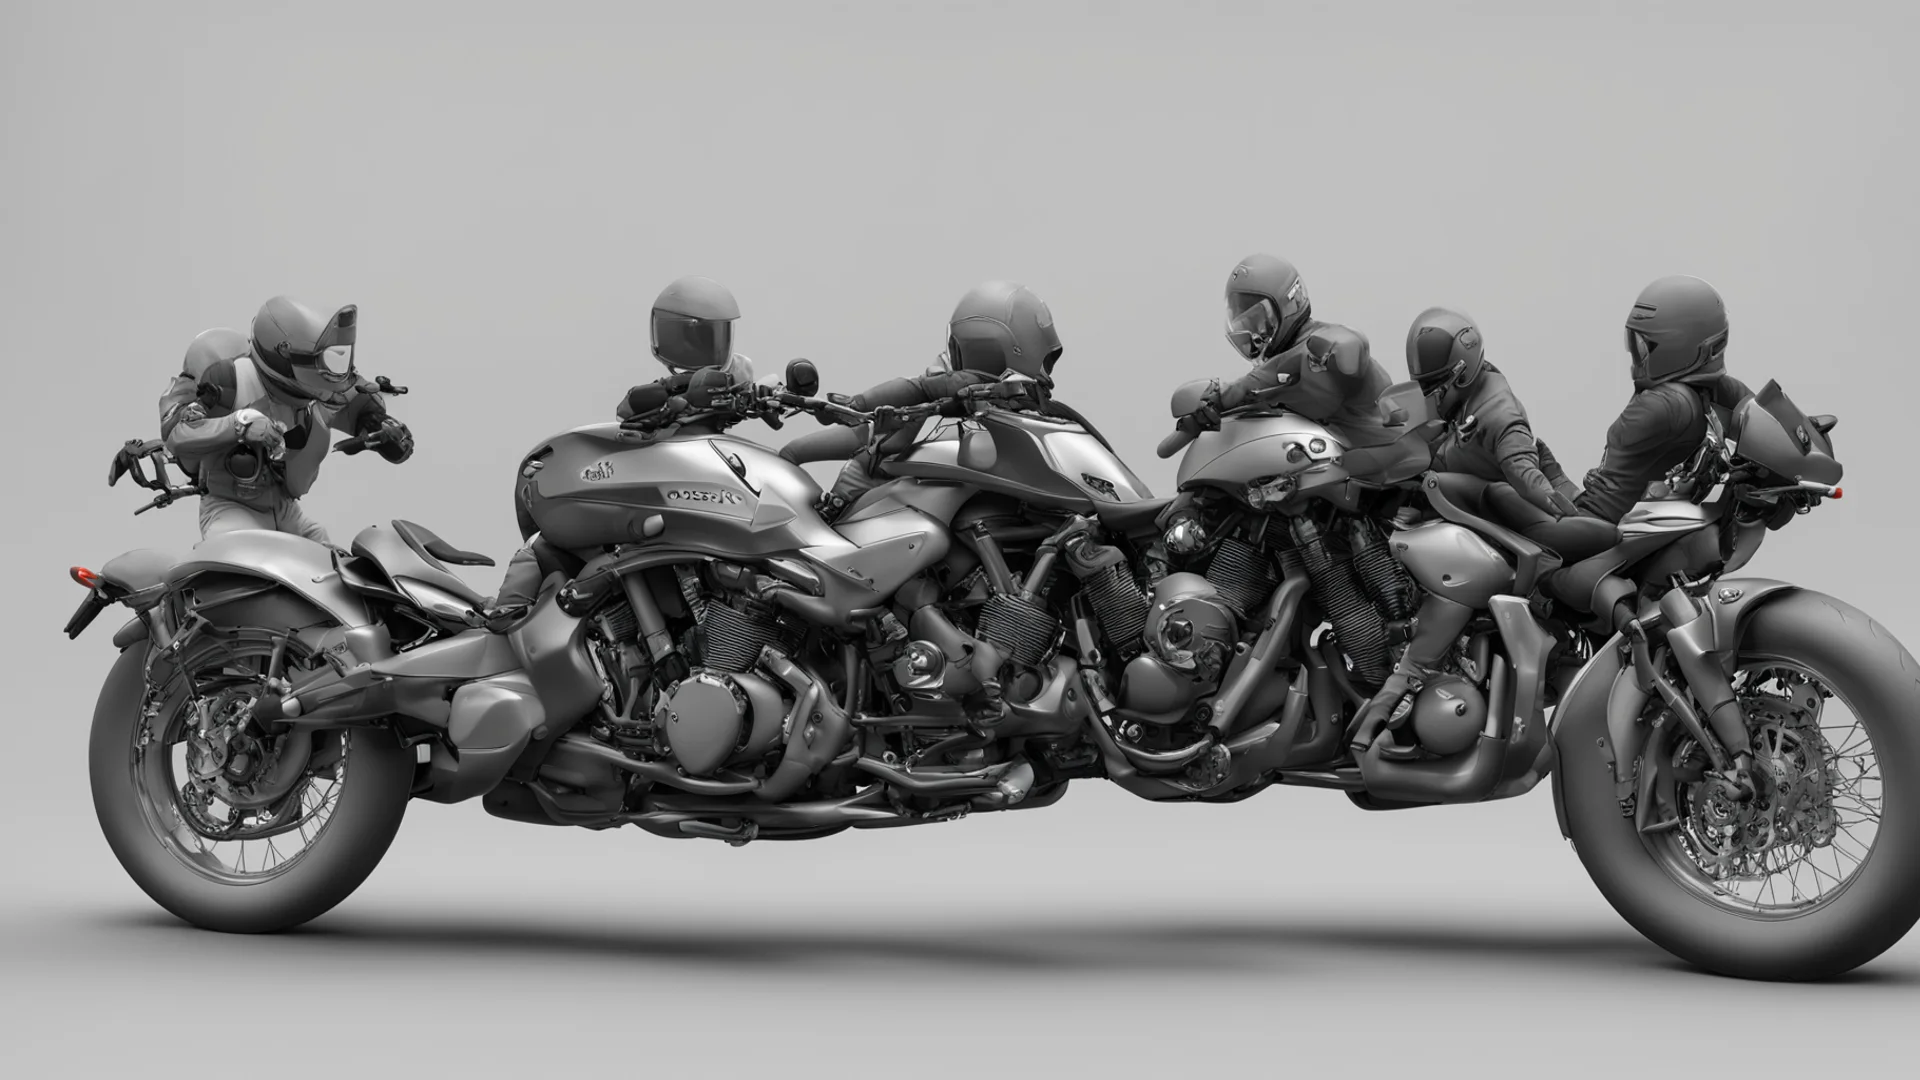 aiamazing motorcycle 3d model with rider group awesome portrait 2 wide